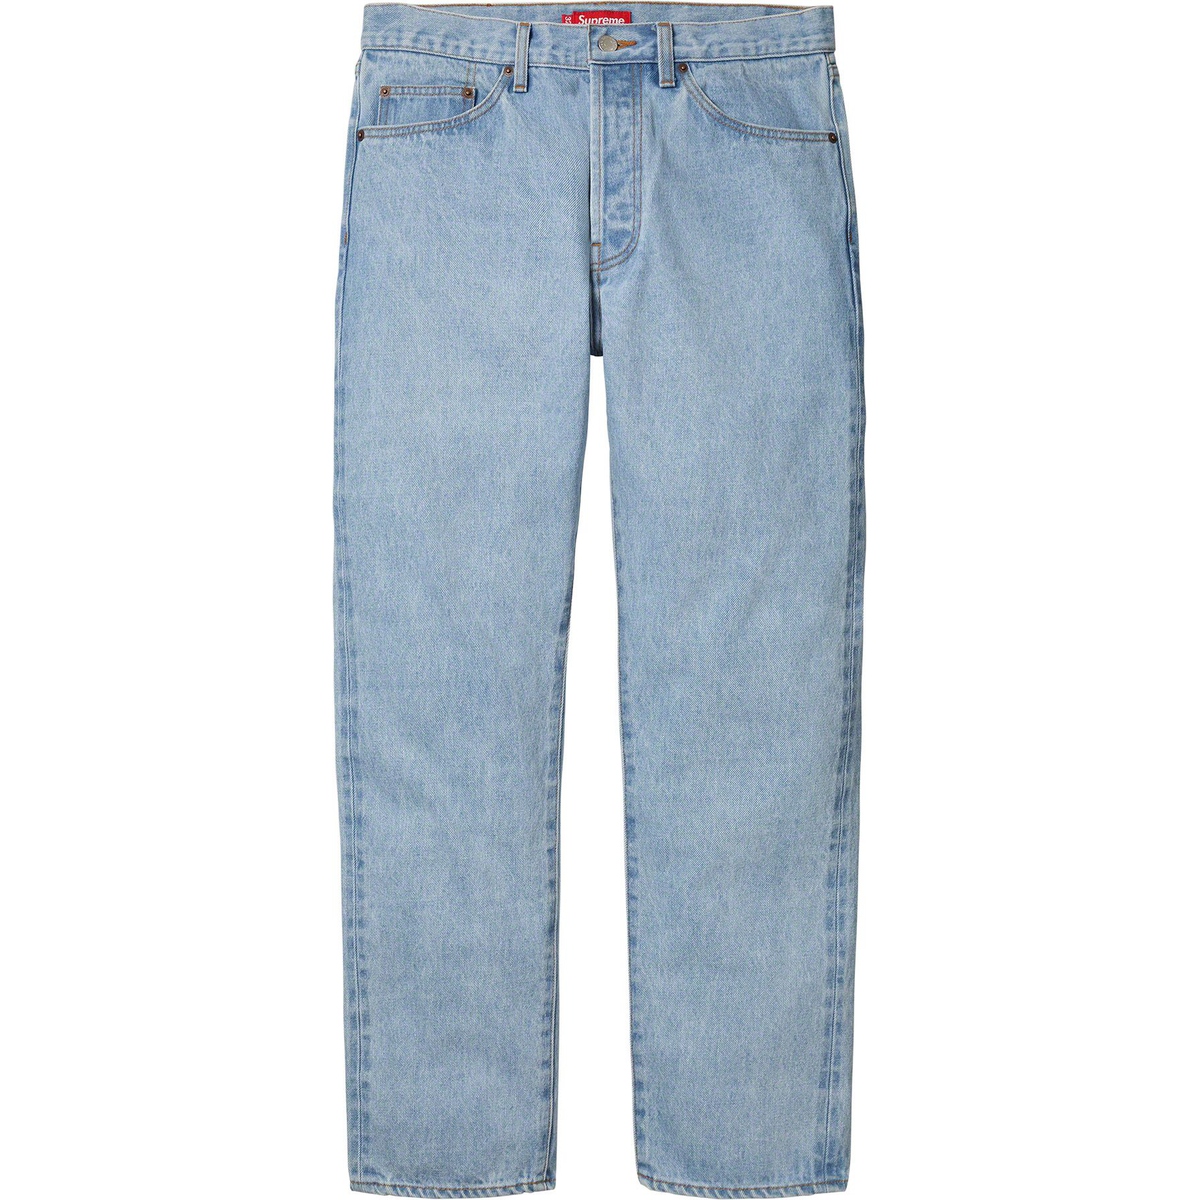 Supreme Stone Washed Slim Selvedge Jean releasing on Week 1 for fall winter 2023